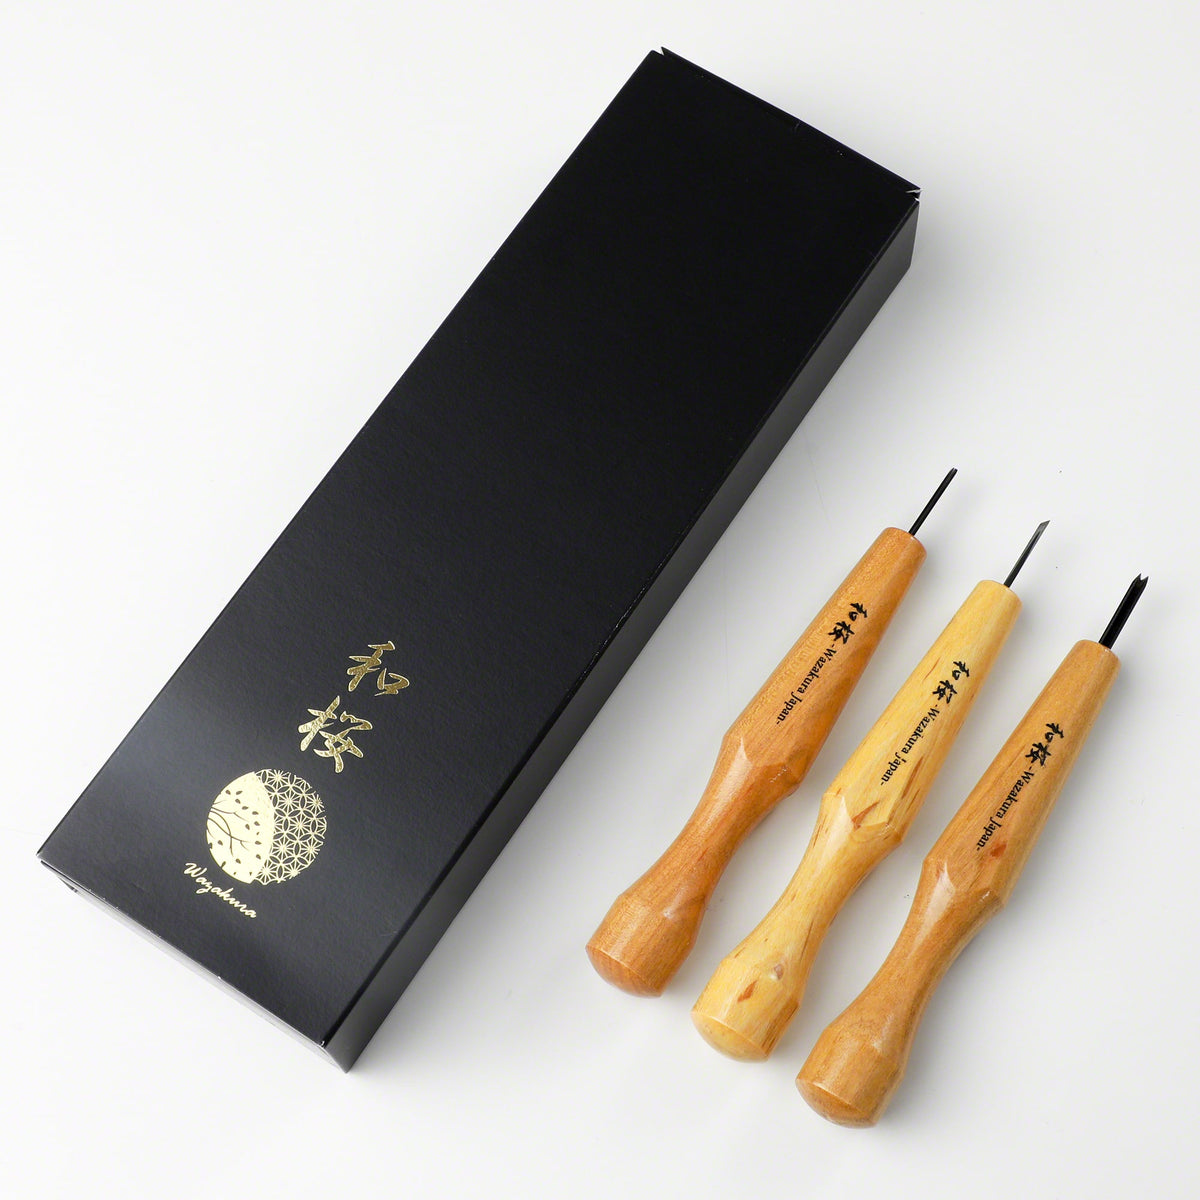 Mikisyo Power Grip Carving Tools, 7 Piece Set (Japan Import)